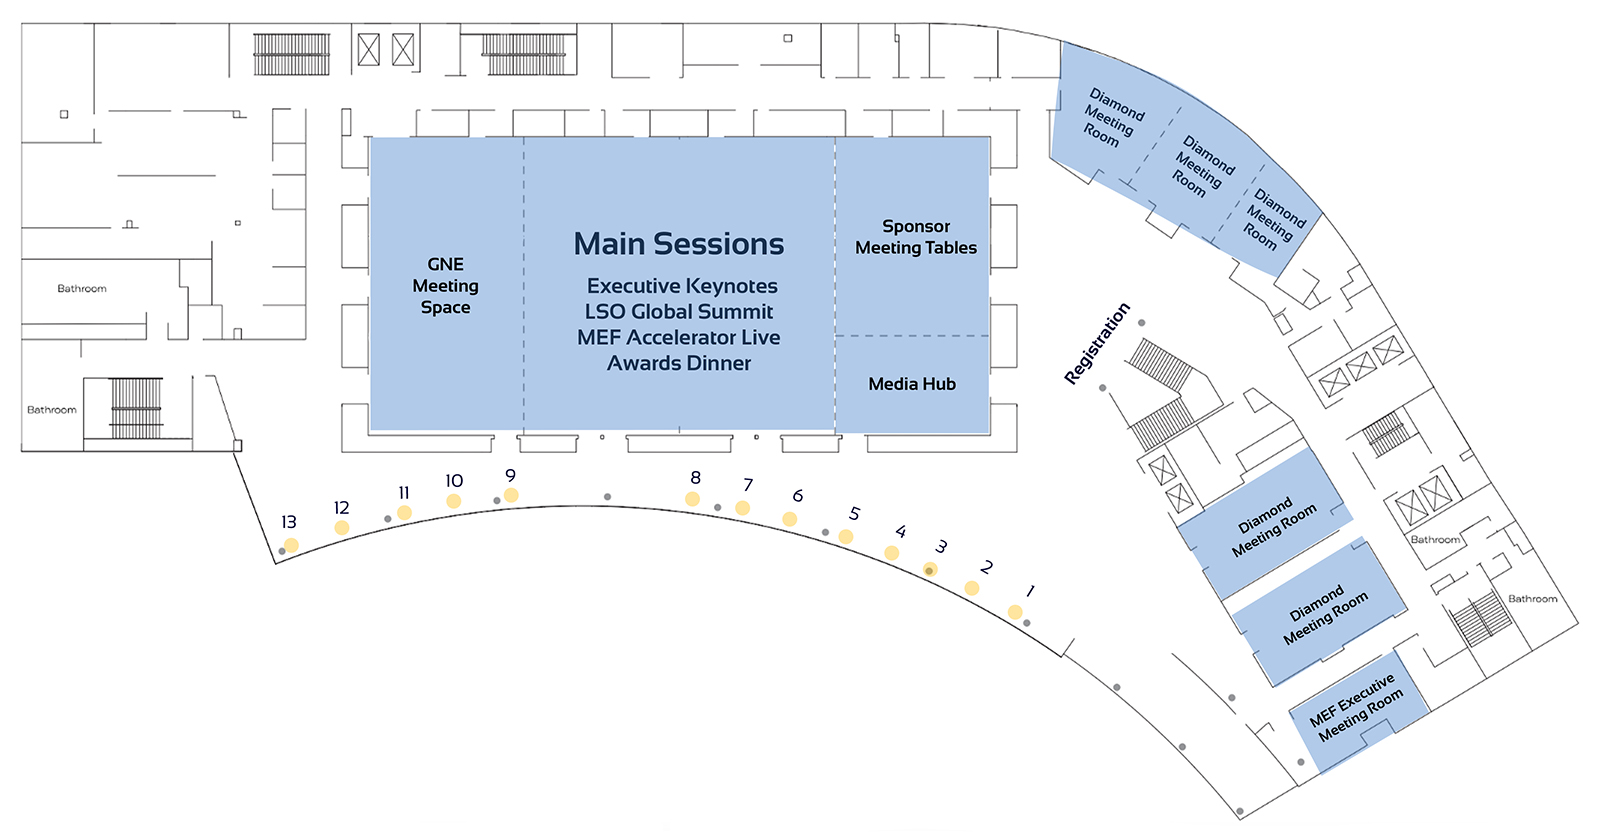 GNE Meeting Space Layout